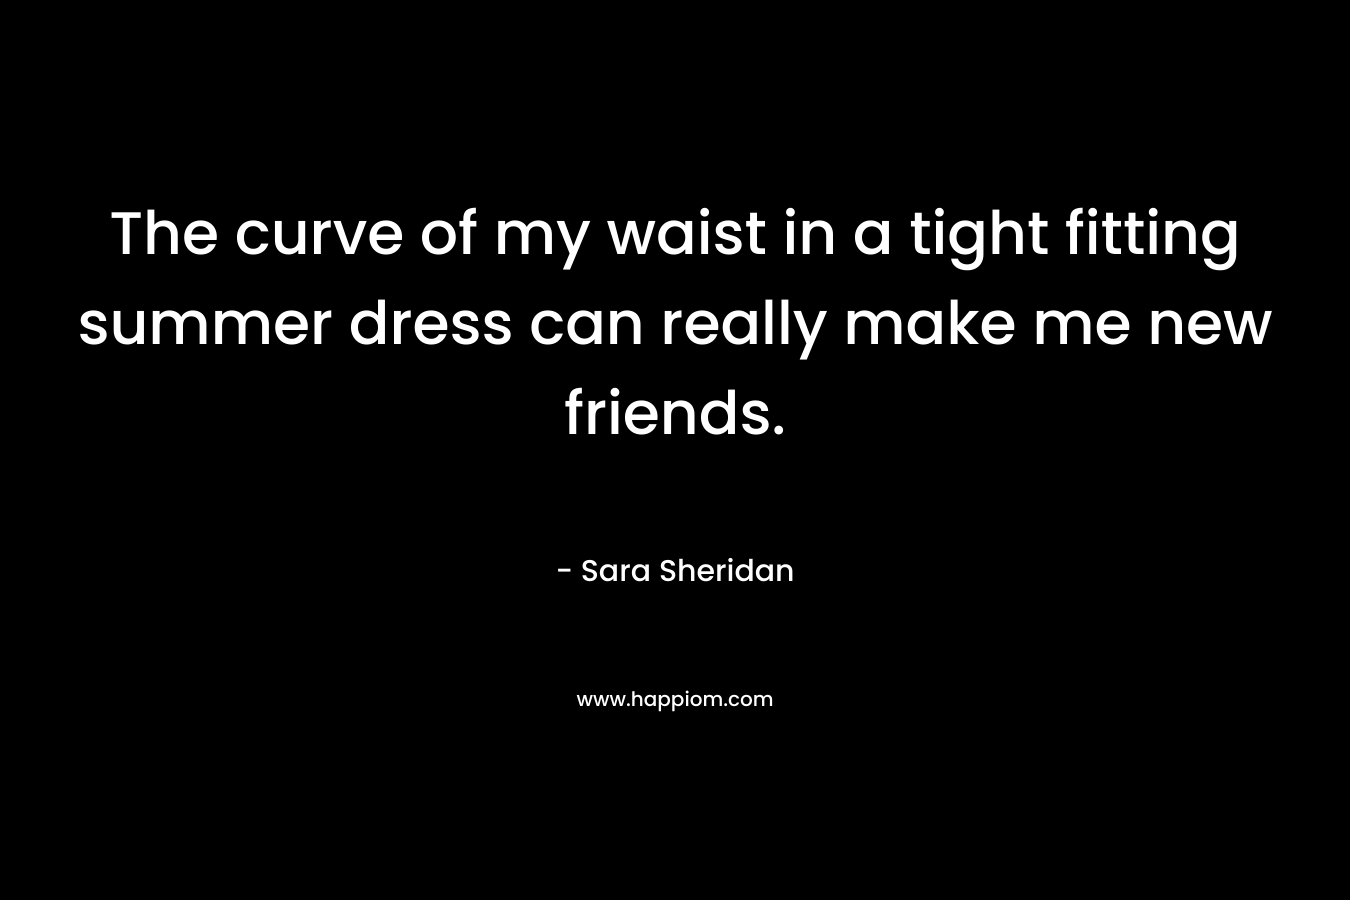 The curve of my waist in a tight fitting summer dress can really make me new friends.